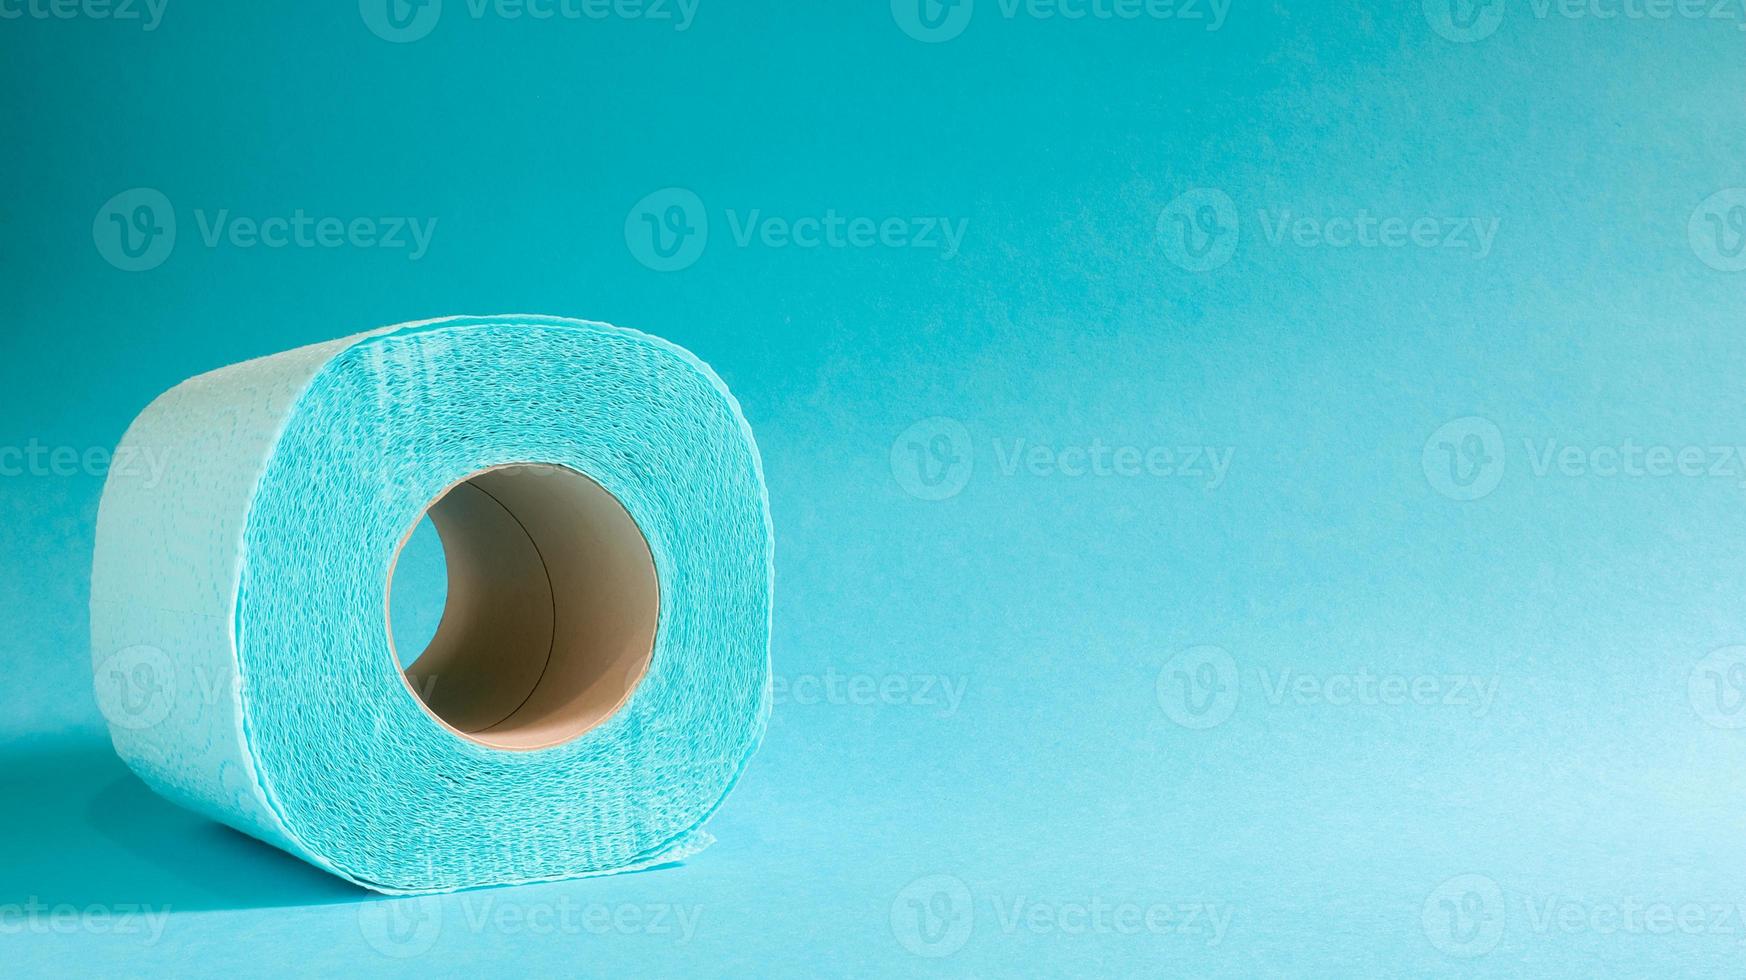 Blue roll of modern toilet paper on a blue background. A paper product on a cardboard sleeve, used for sanitary purposes from cellulose with cutouts for easy tearing. Embossed drawing. copy space. photo